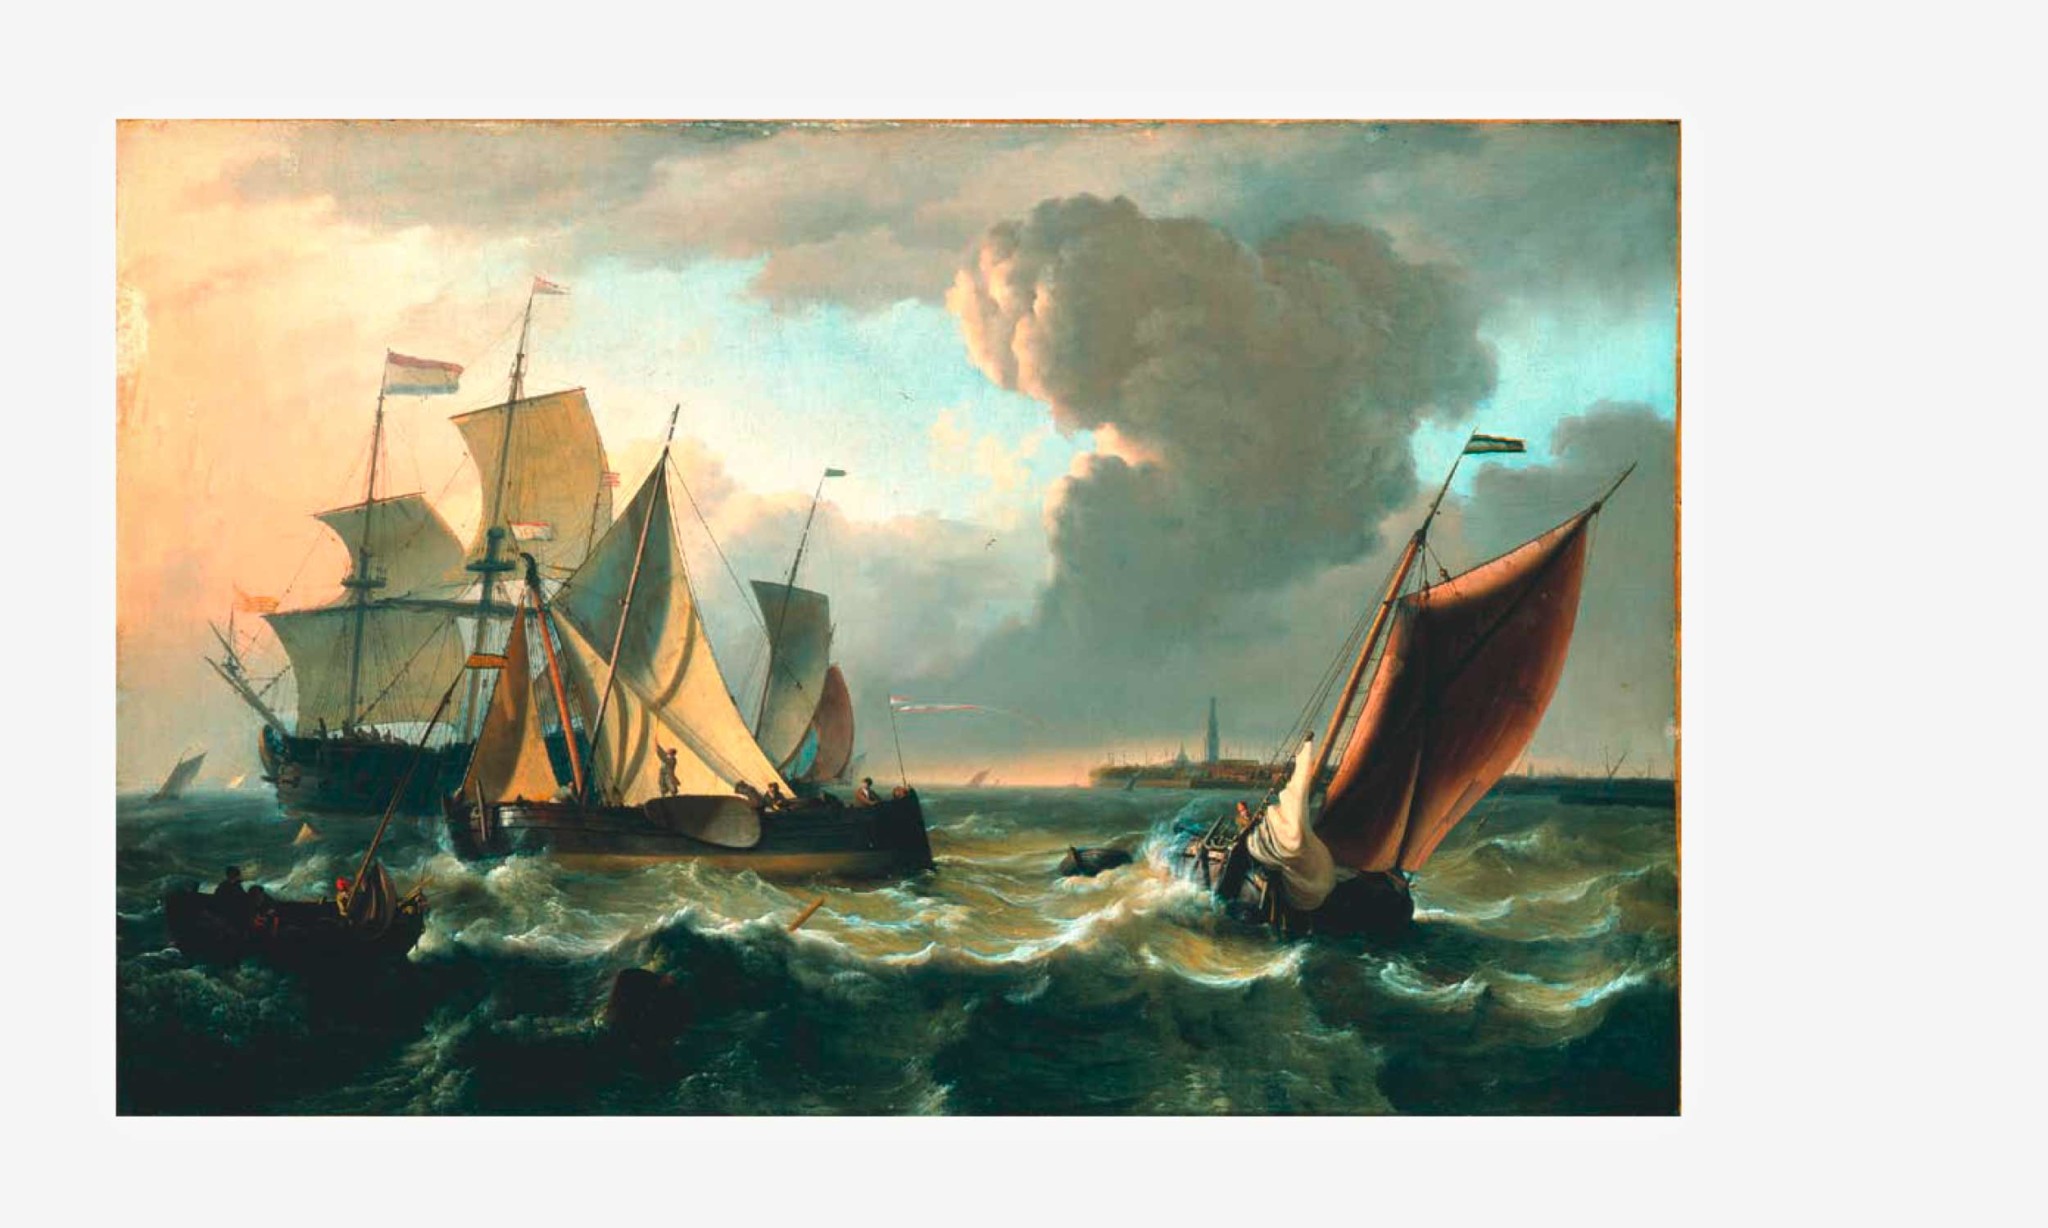 An illustration of the painting Moving Sea with Ships by the Dutch painter Ludolf Backhuyzen. It shows four different sailing ships at sea in a strong swell. On the horizon is an island on which a lighthouse stands.